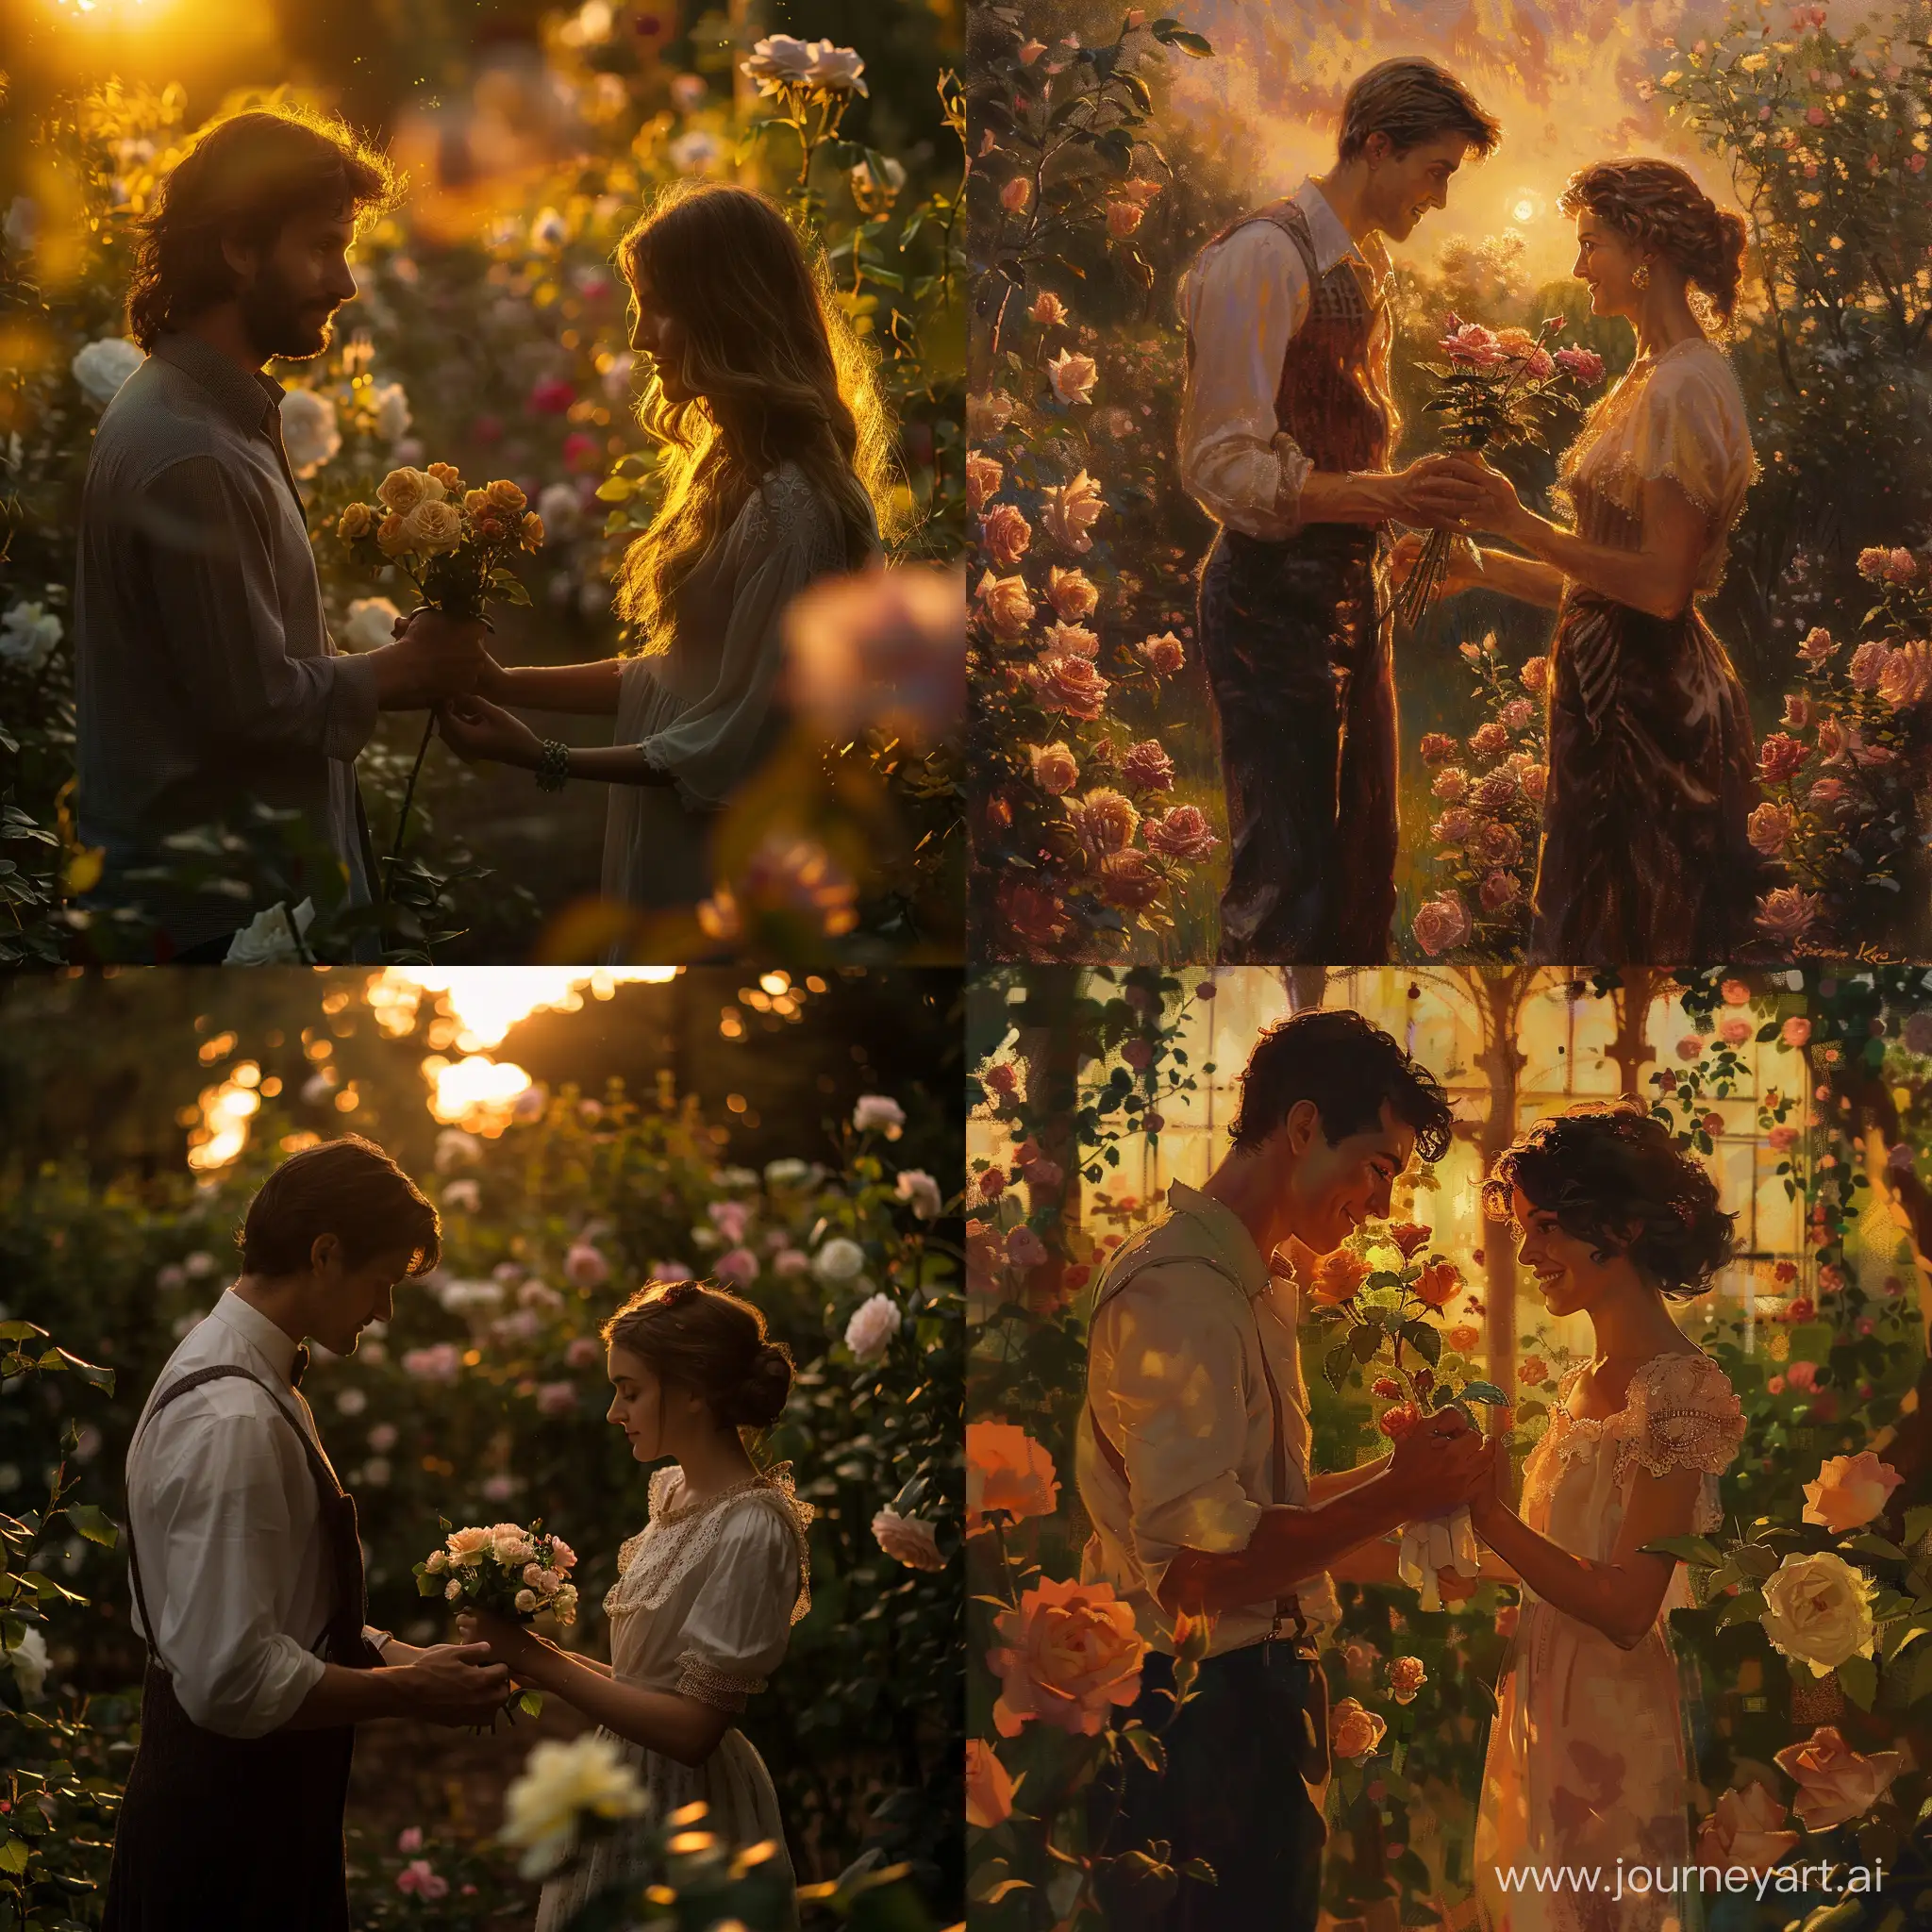 Romantic-Gesture-Man-Giving-Flowers-to-Woman-in-Rose-Garden-at-Sunset